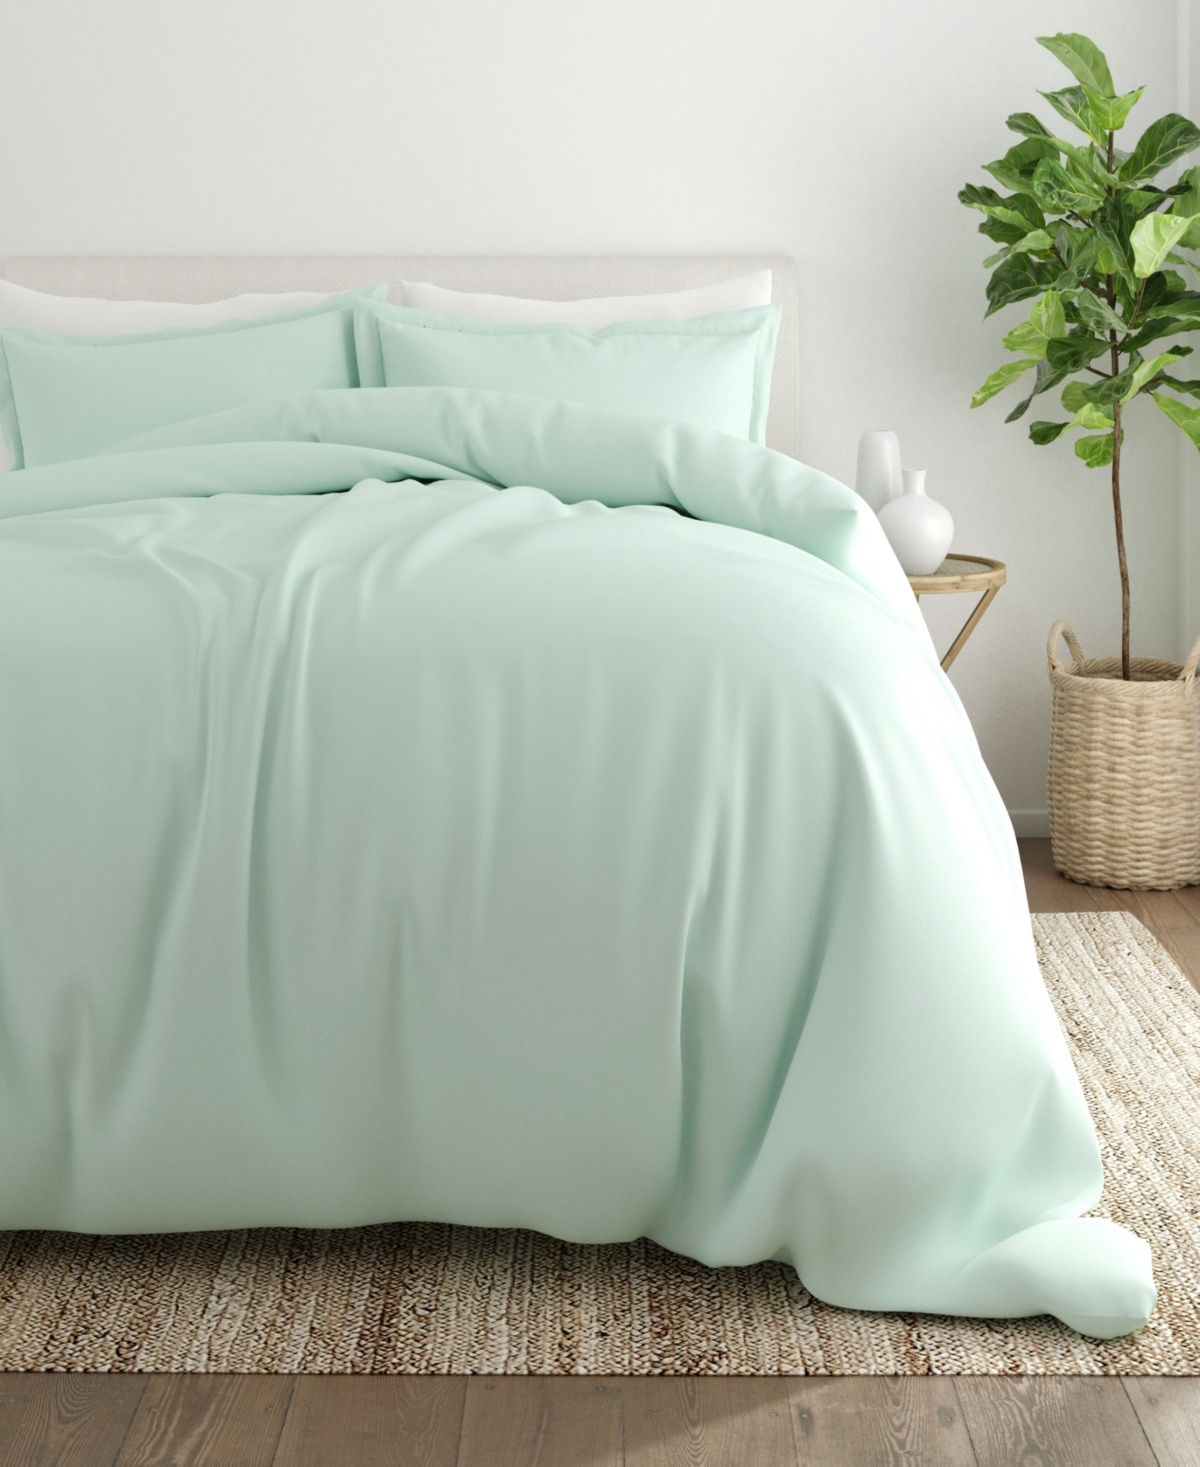 Ienjoy Home Double Brushed Solid Duvet Cover Set, King/california King In Mint